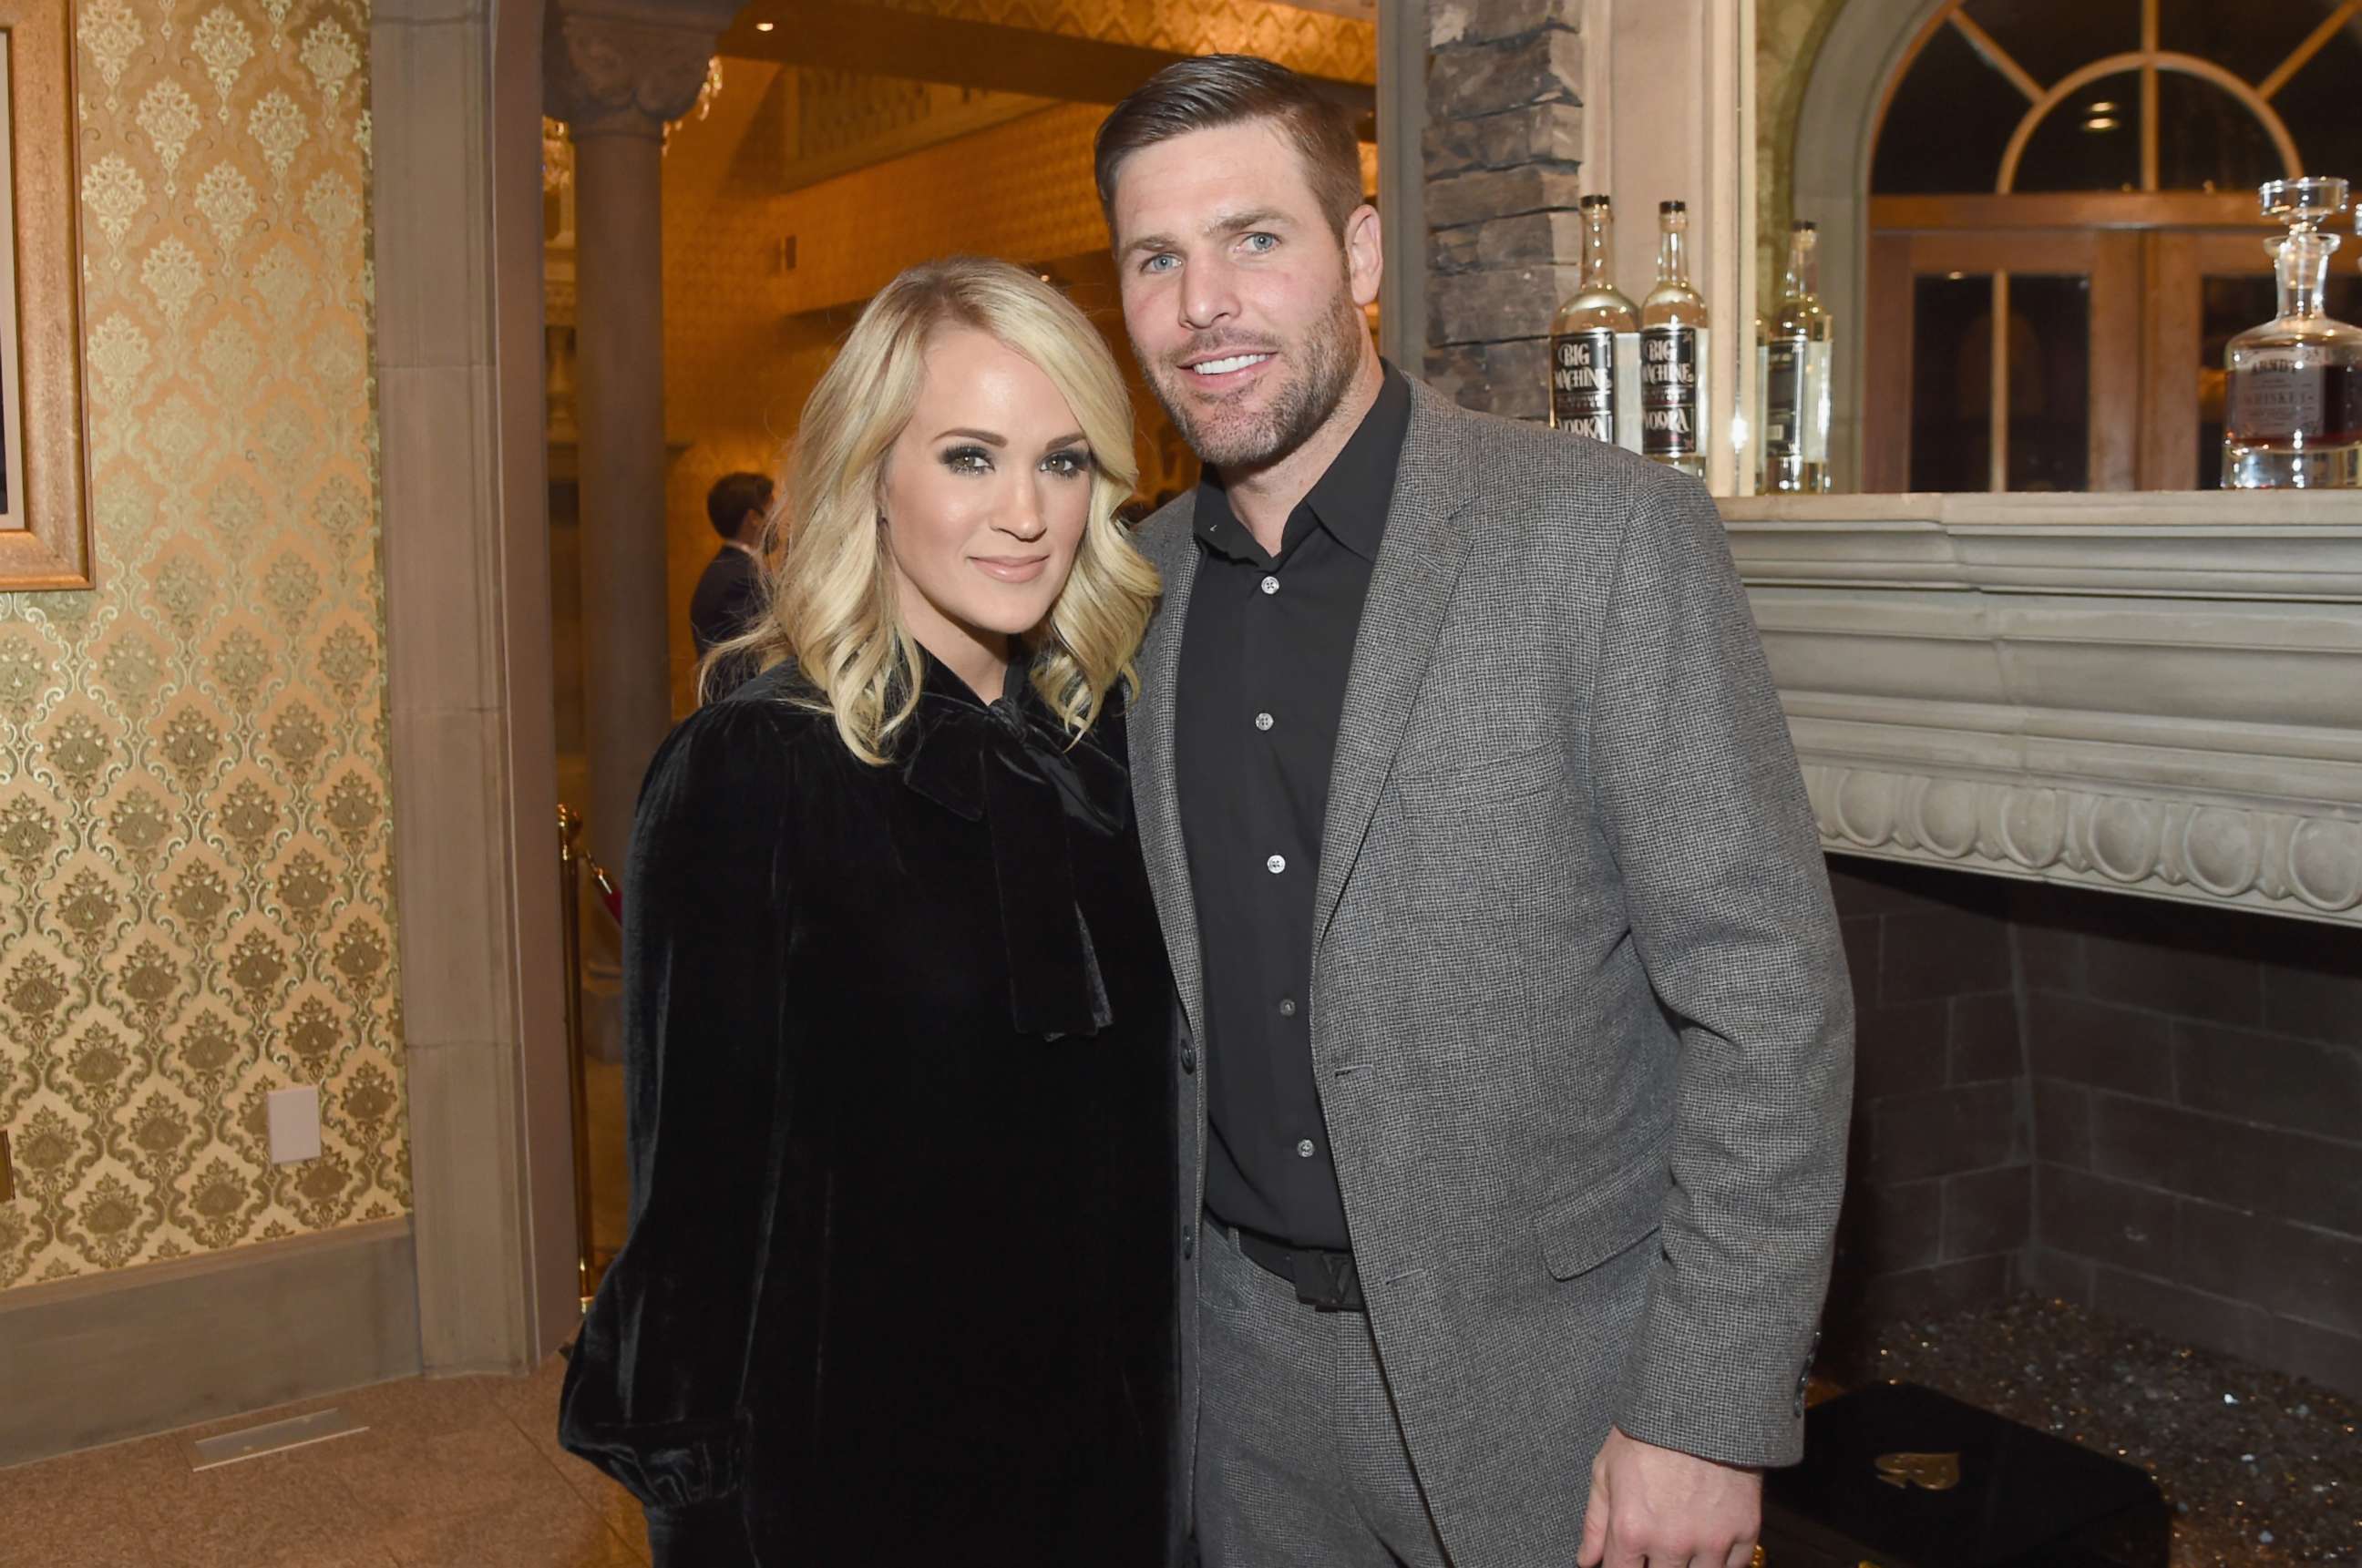 PHOTO: Carrie Underwood (L) and Mike Fisher (R) attend Nashville Shines for Haiti benefiting Sean Penn's J/P Haitian relief organization at the Arndt Estate, Oct. 24, 2017 in Brentwood, Tenn. 